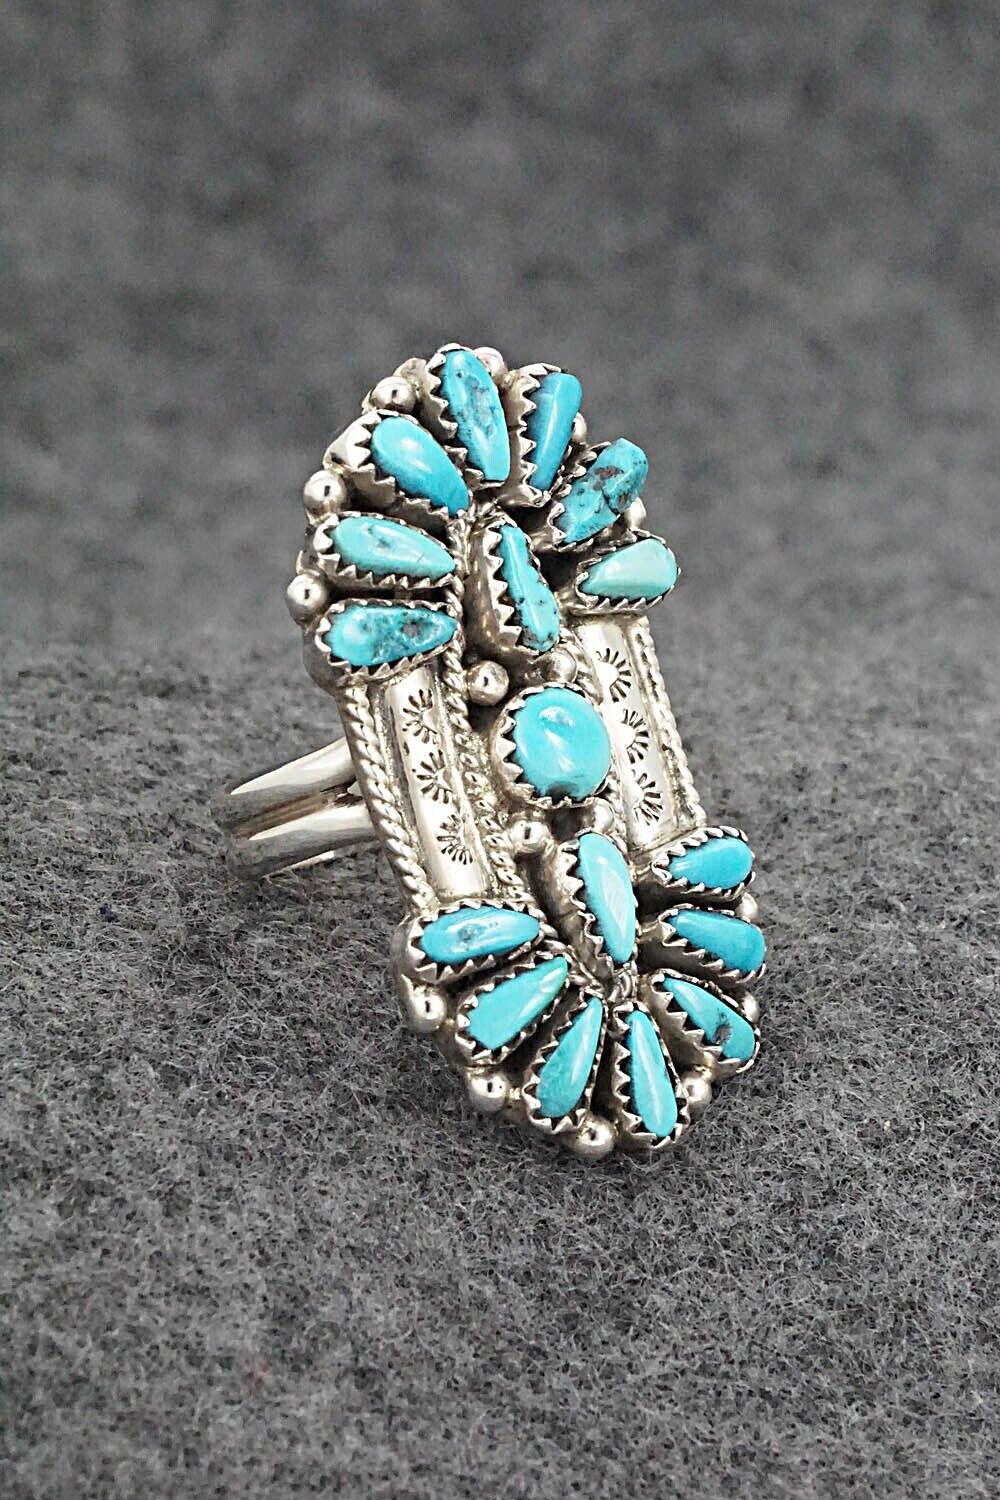 Turquoise & Sterling Silver Ring - Donovan Wilson - Size 7.5